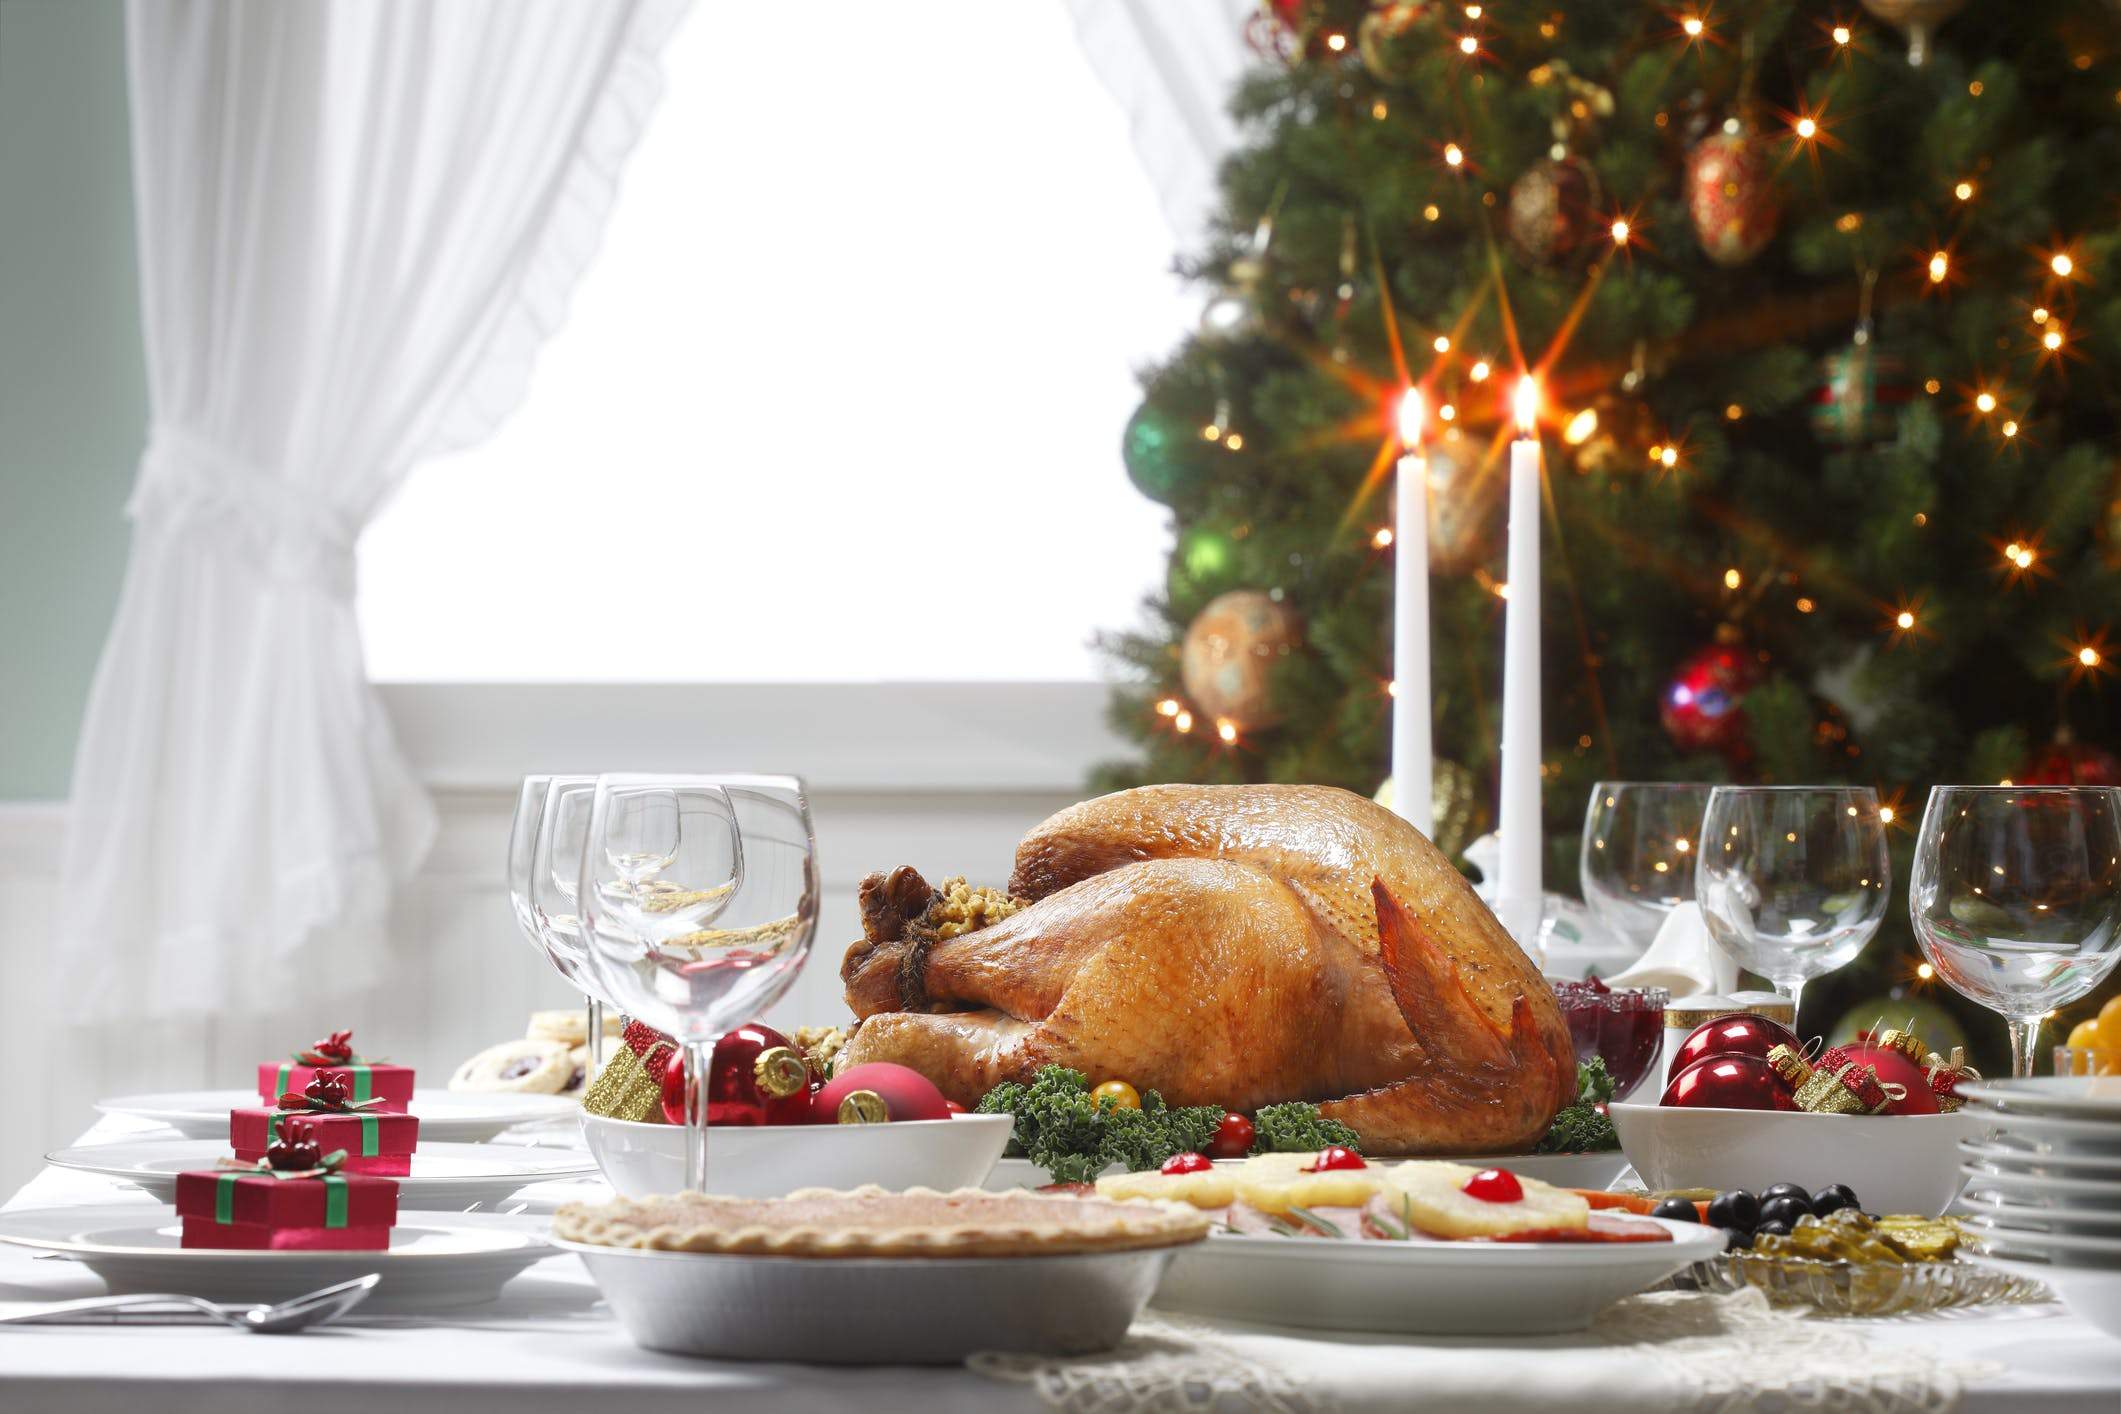 Keeping Food Safe Over the Holidays